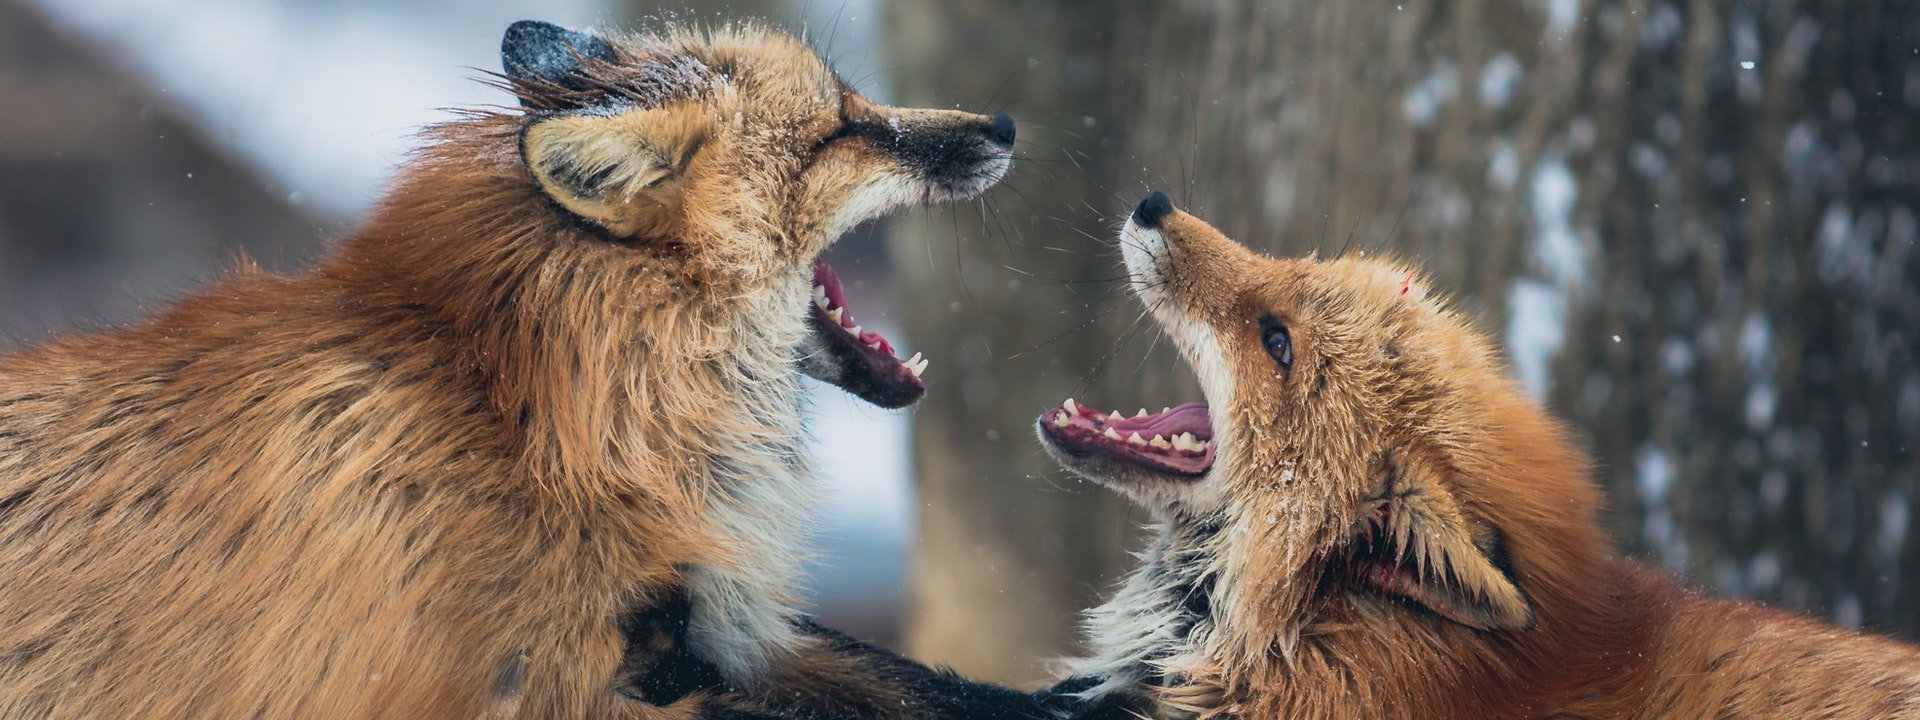 foxes arguing